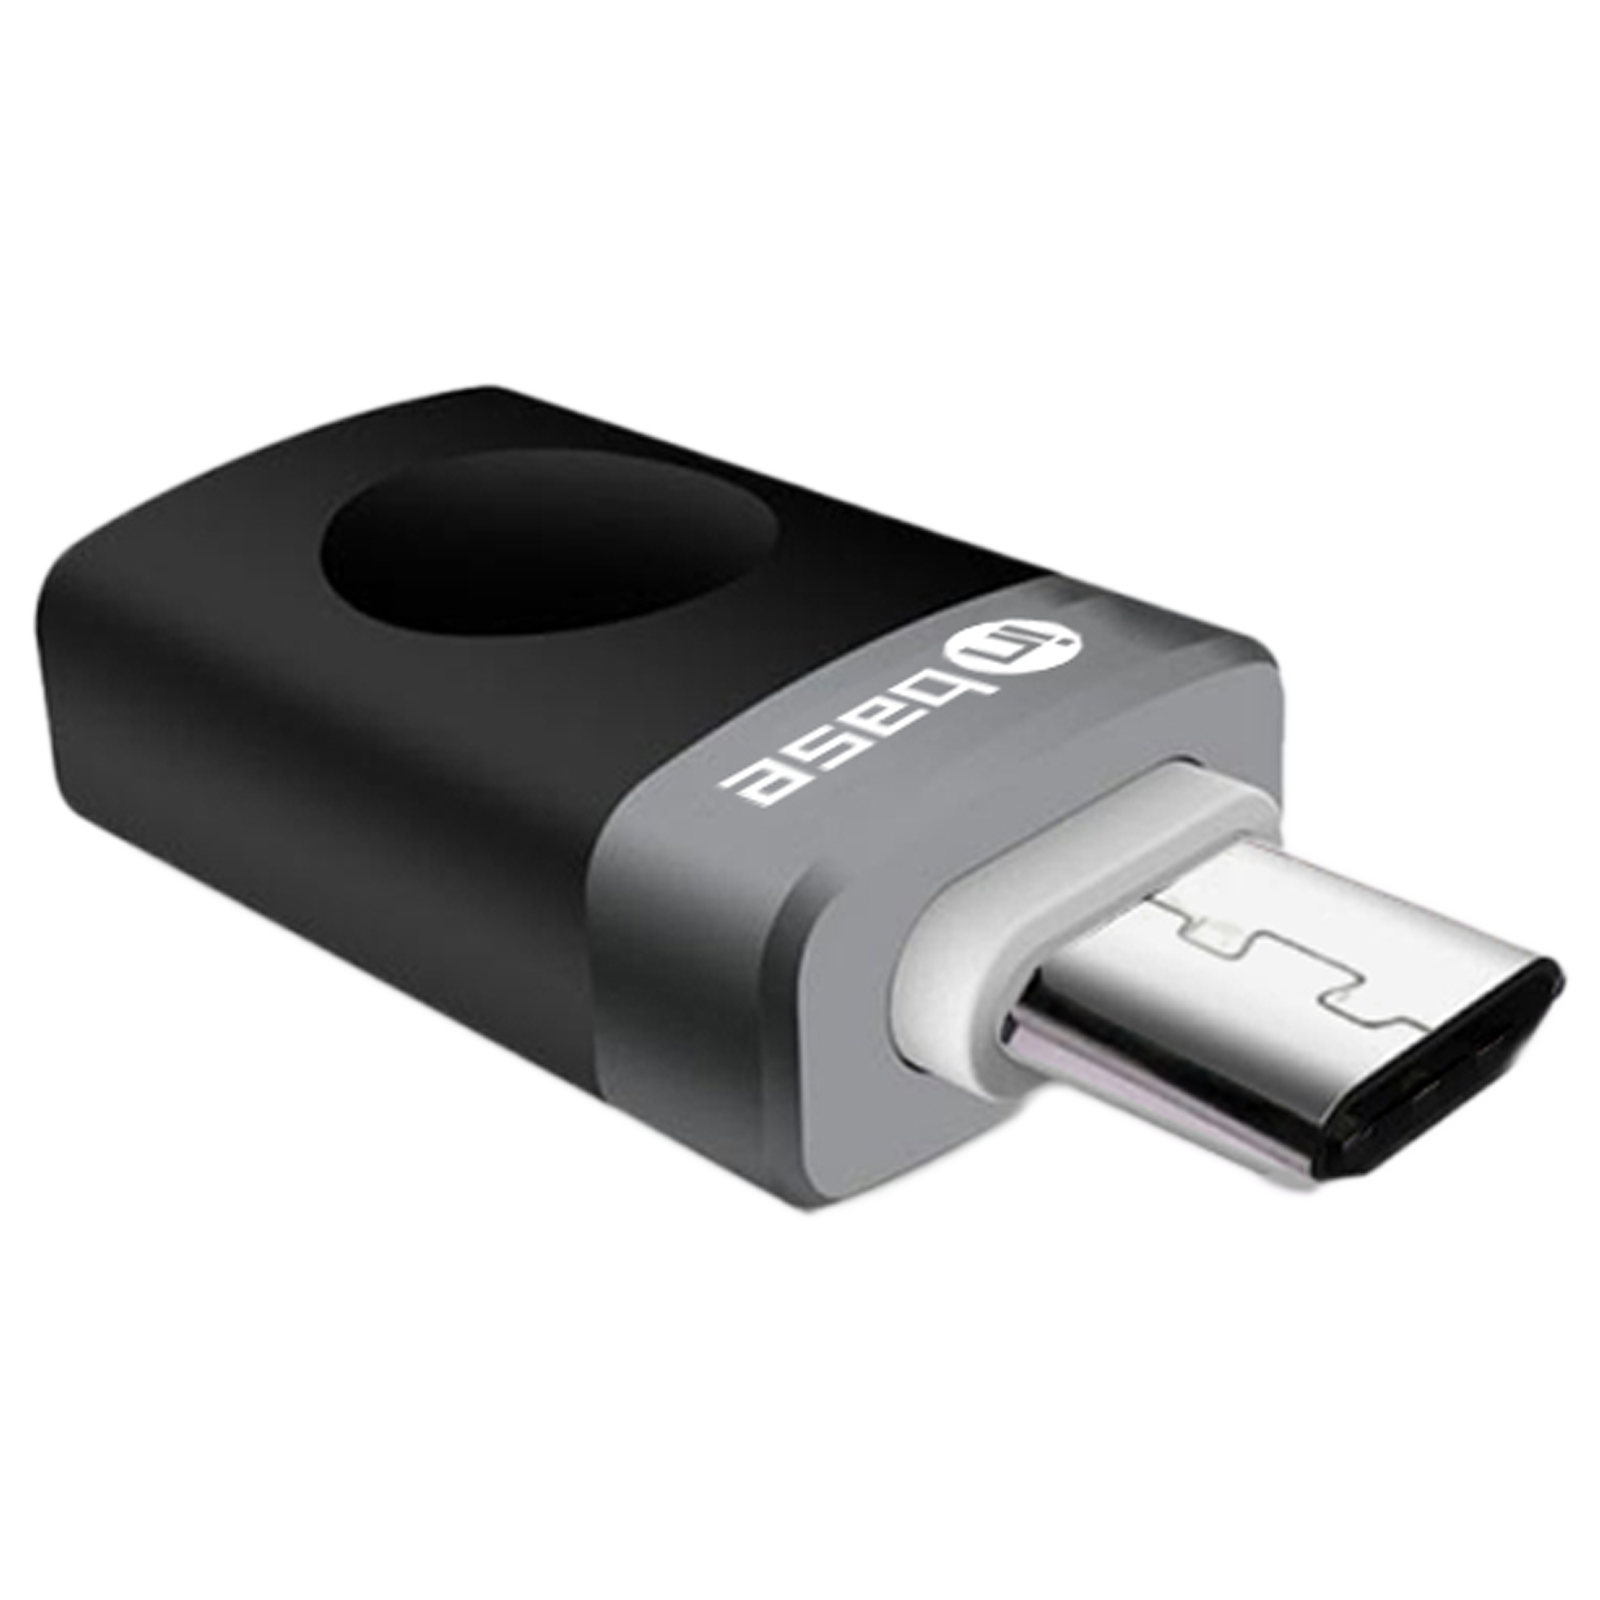 Inbase USB 3.1 Type-C to USB 3.1 Type-A Data Transfer OTG Connector (Safe and Durable, IB-2047, Black)_1